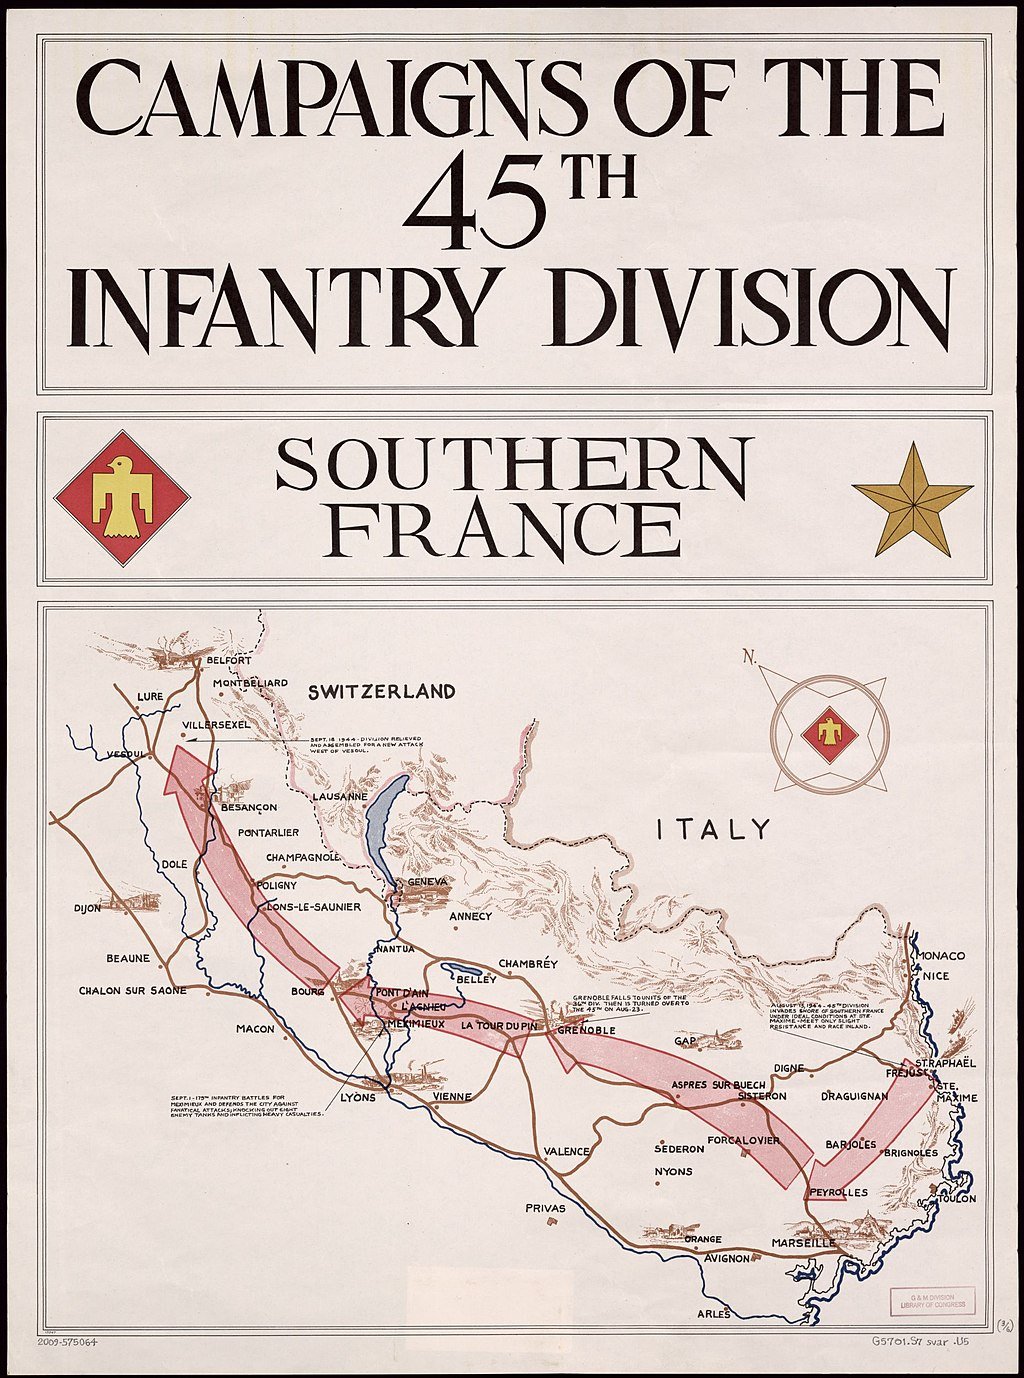 1024px-45th_Infantry_Division_Southern_France_campaign.jpg